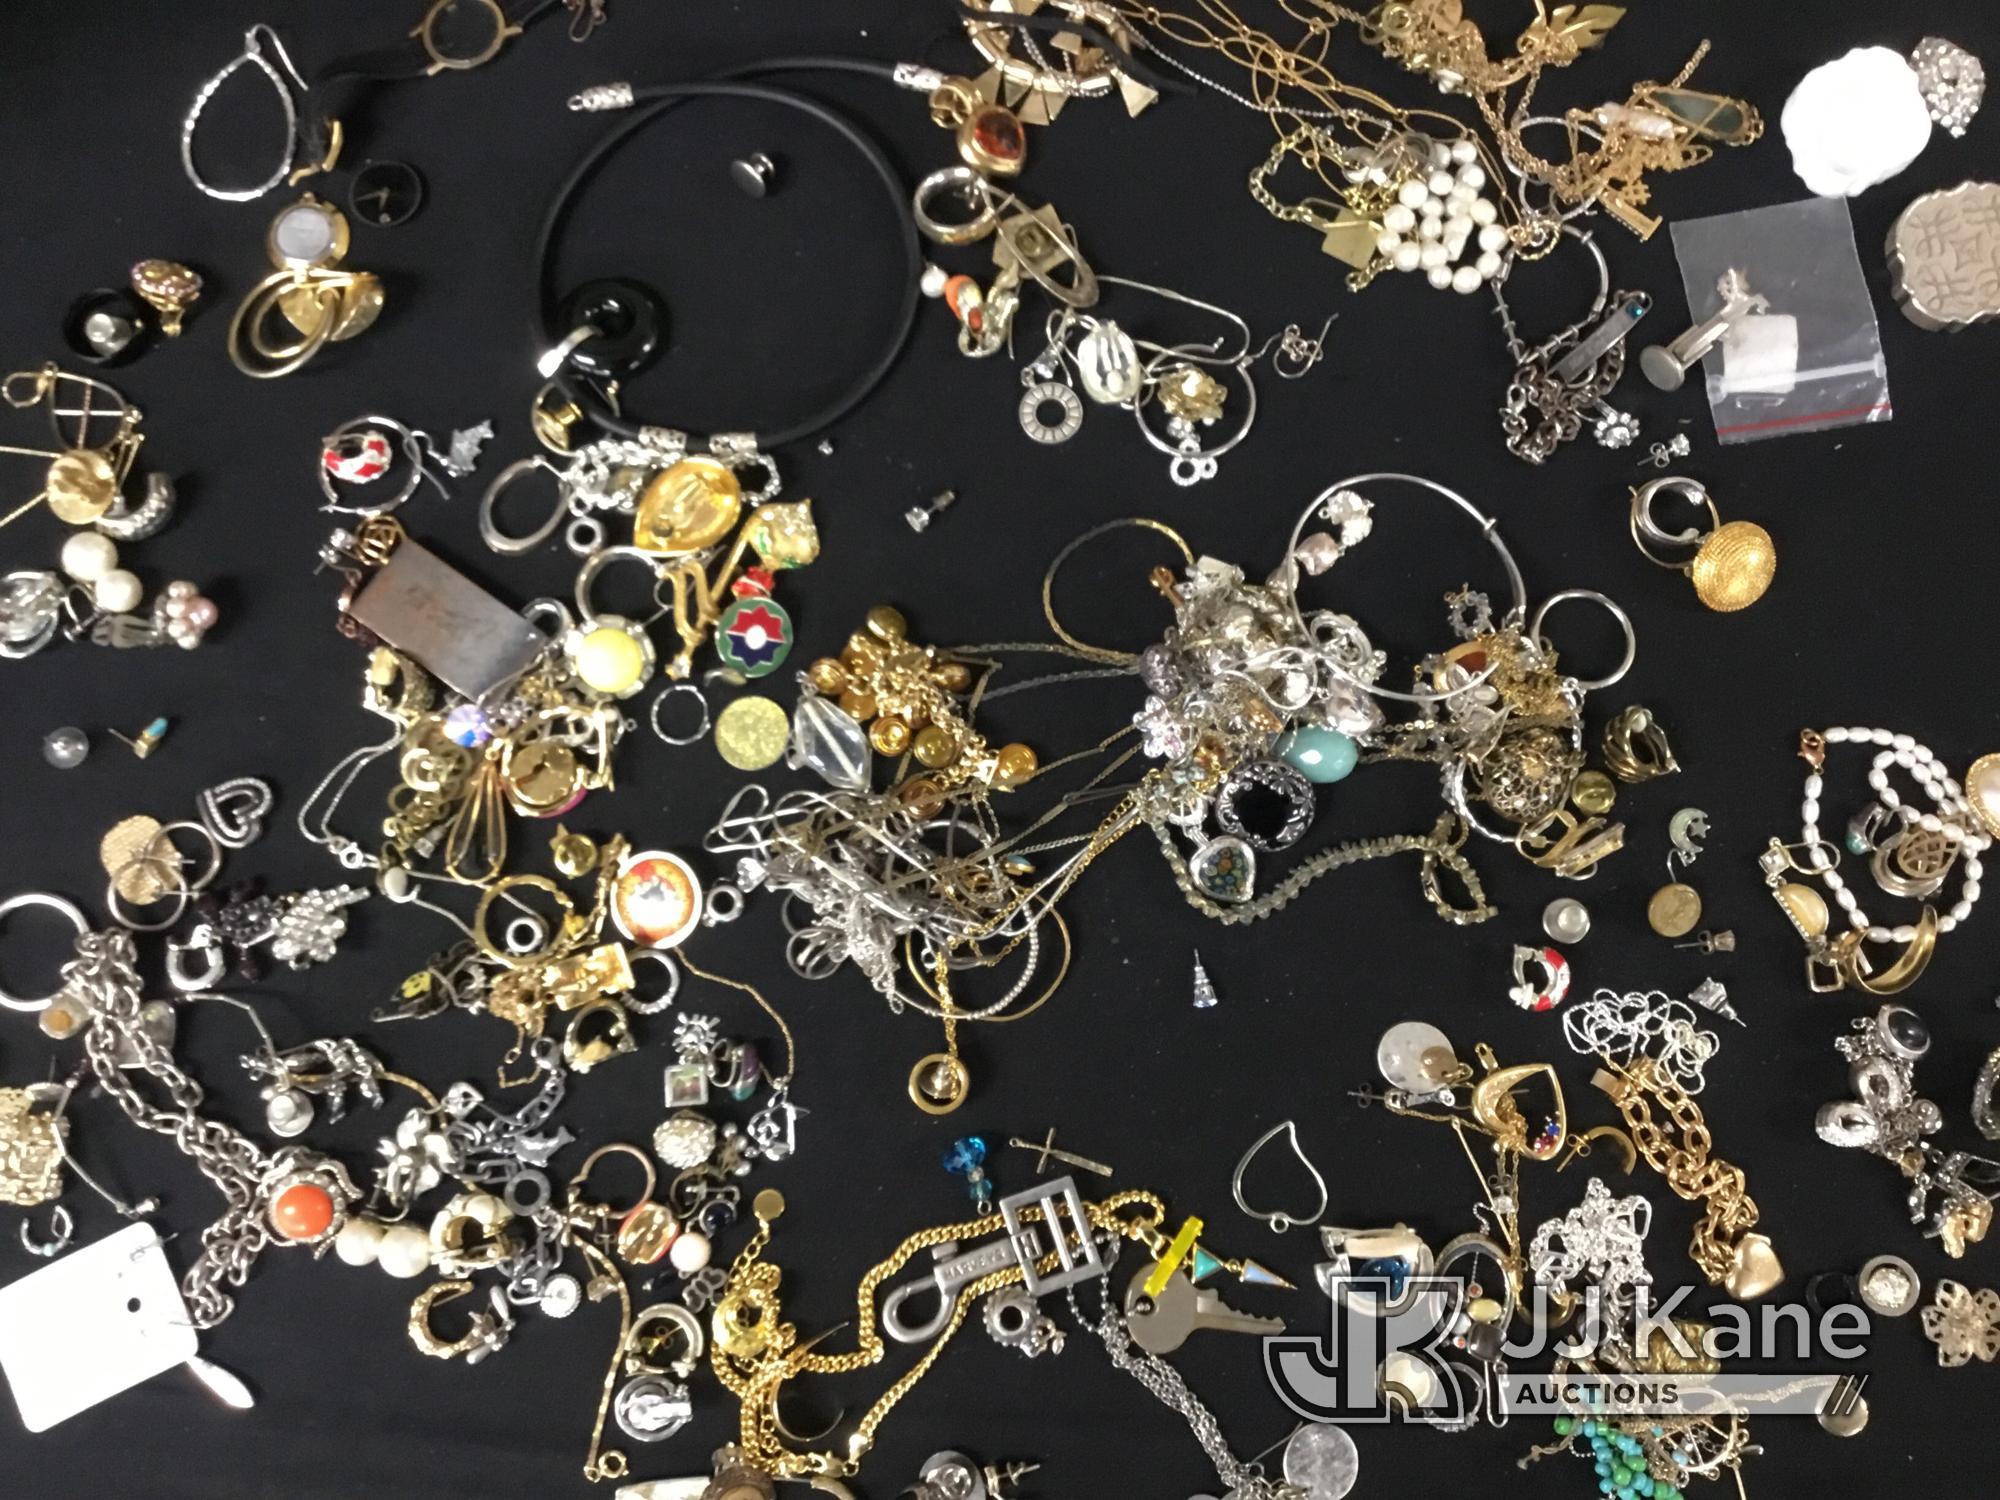 (Jurupa Valley, CA) Jewelry | possibly costume jewelry | authenticity unknown (Used) NOTE: This unit